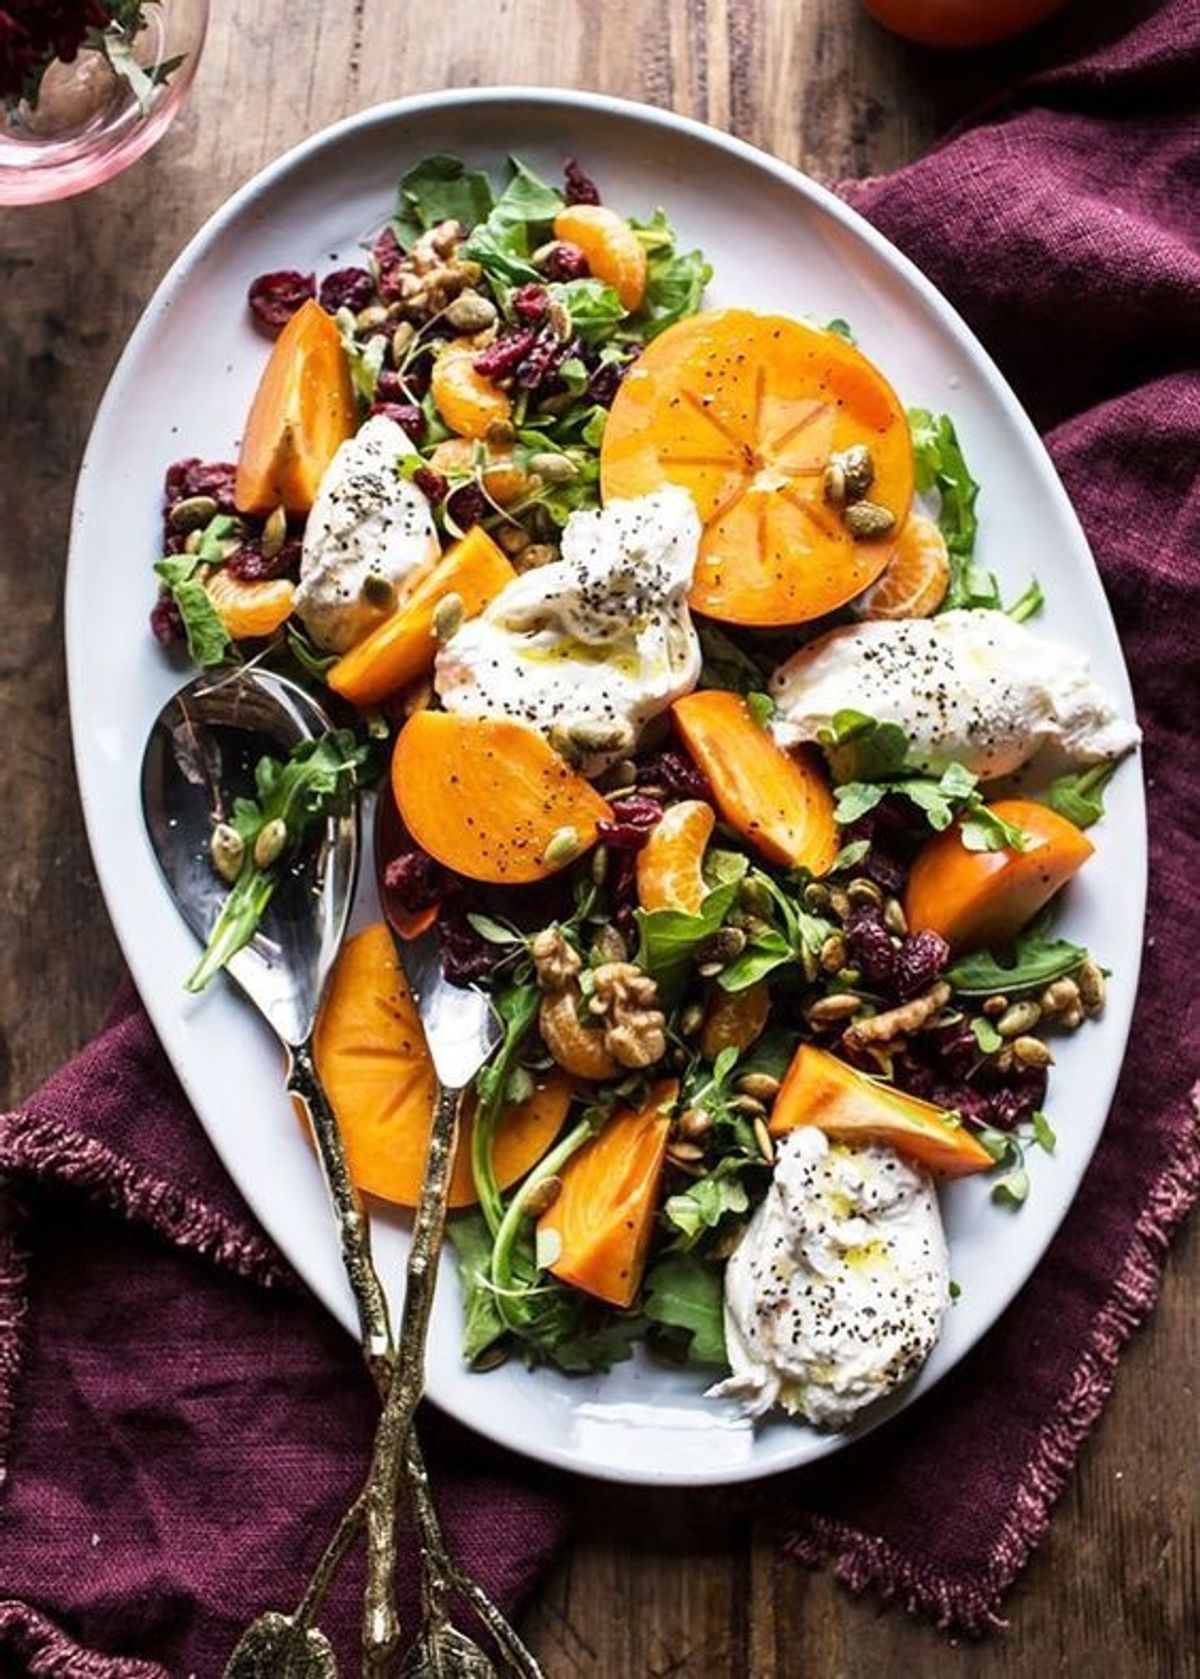 14 Filling Winter Salads That Count as Comfort Food